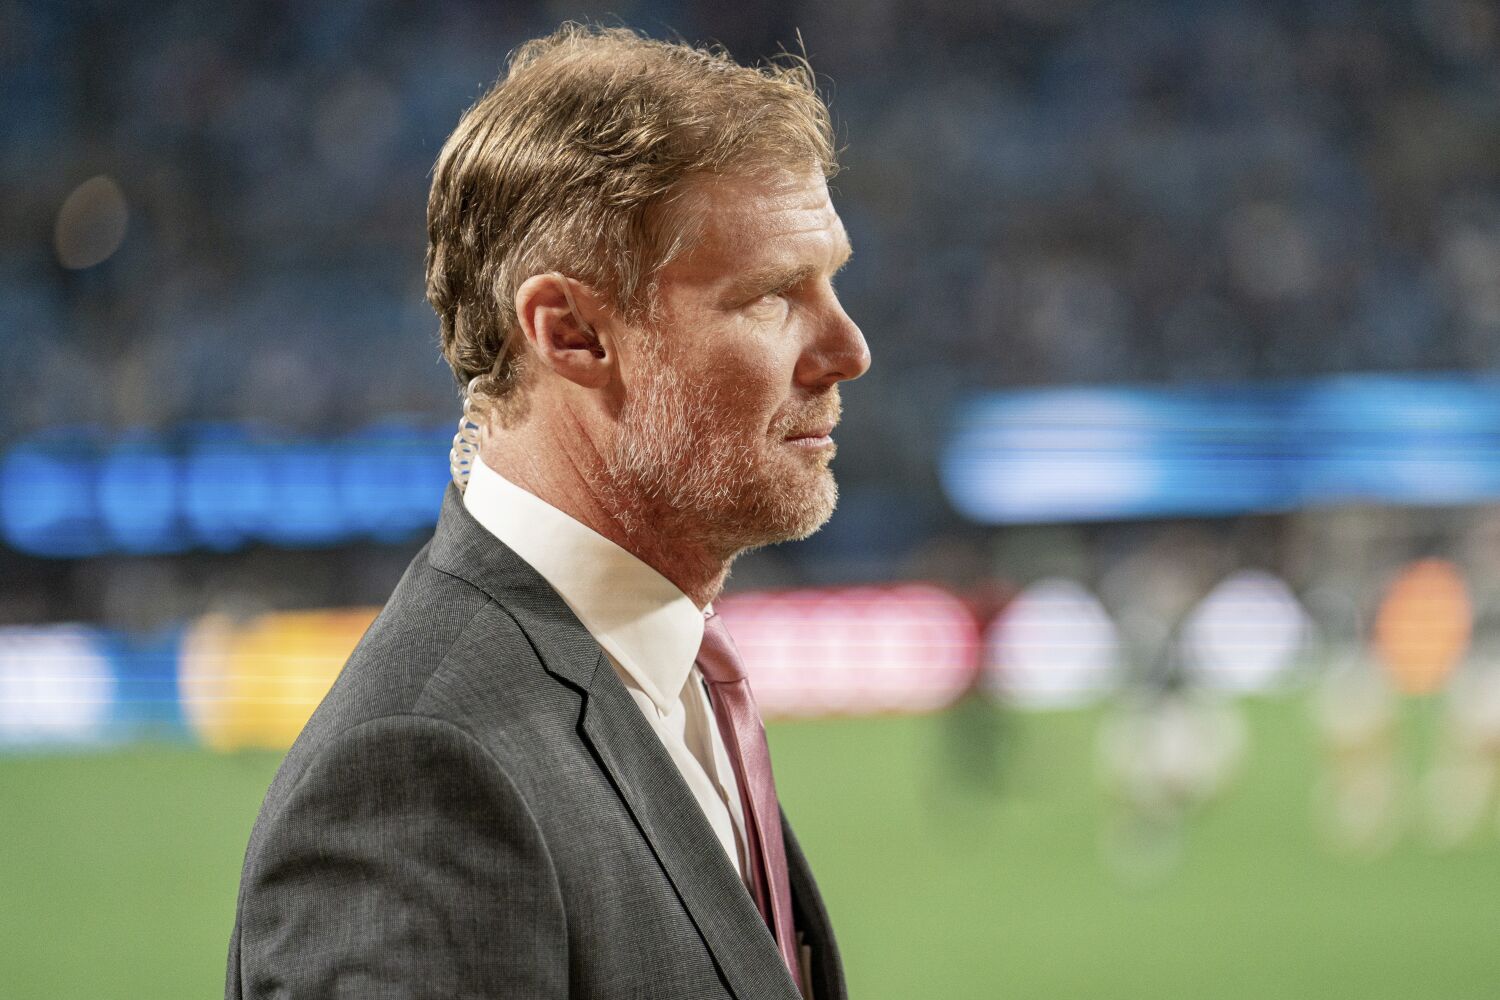 Alexi Lalas and Stu Holden embrace World Cup pressure as players turned broadcasters